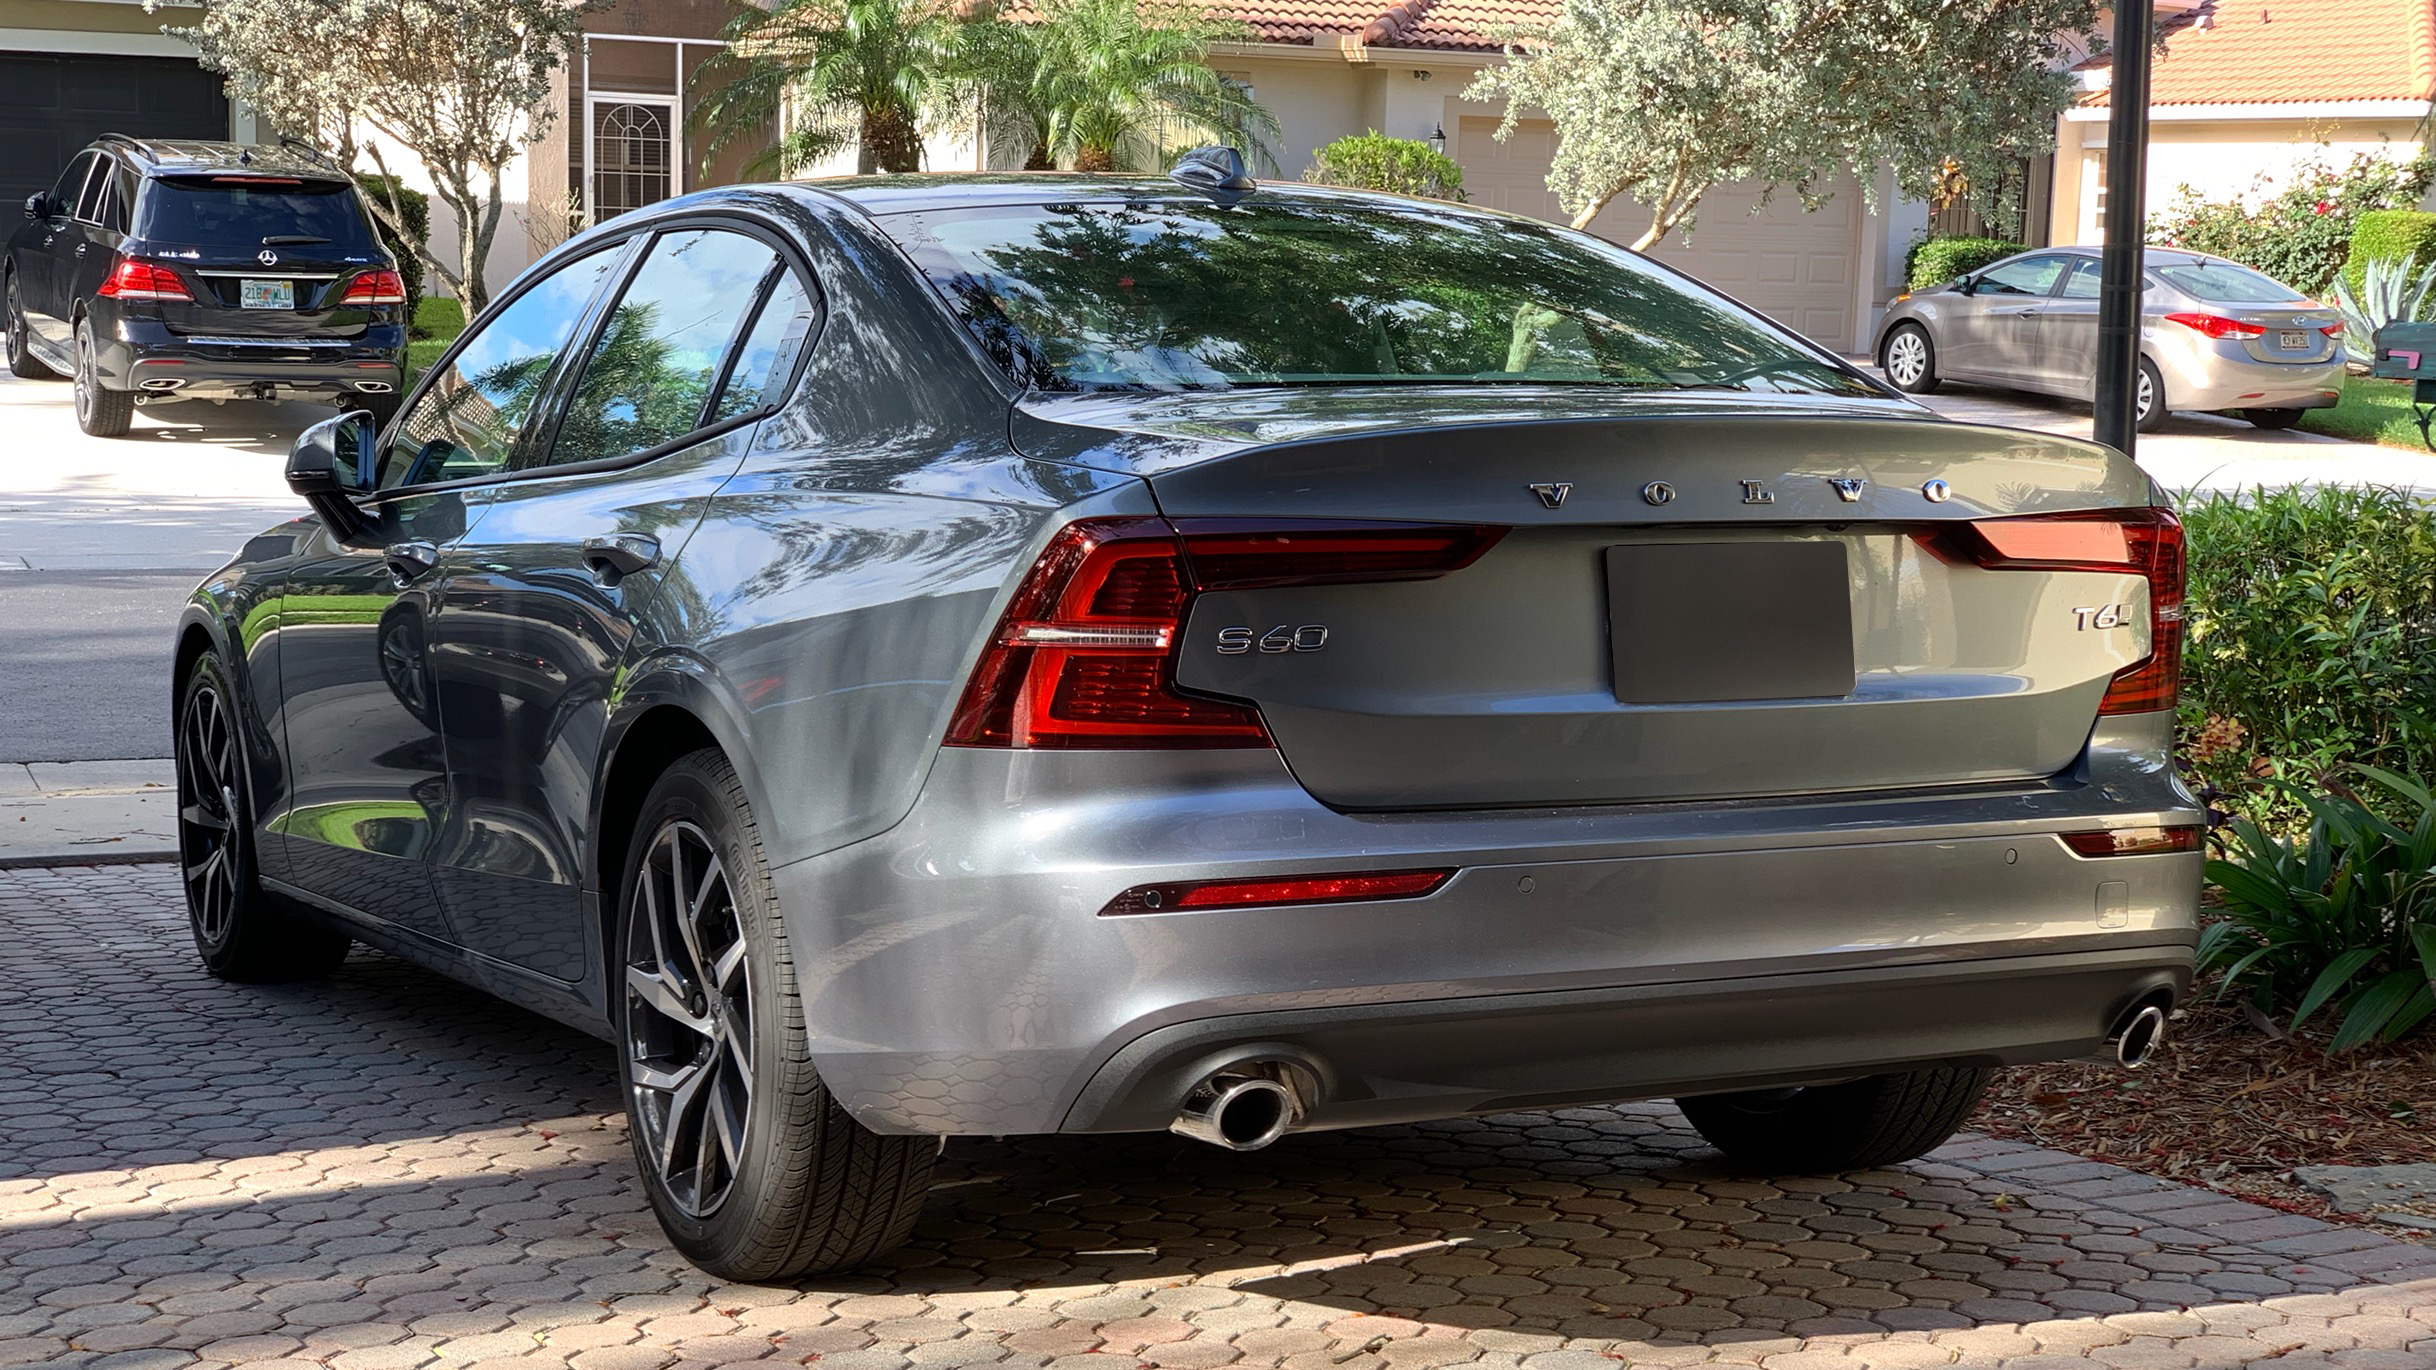 Rear of the S60